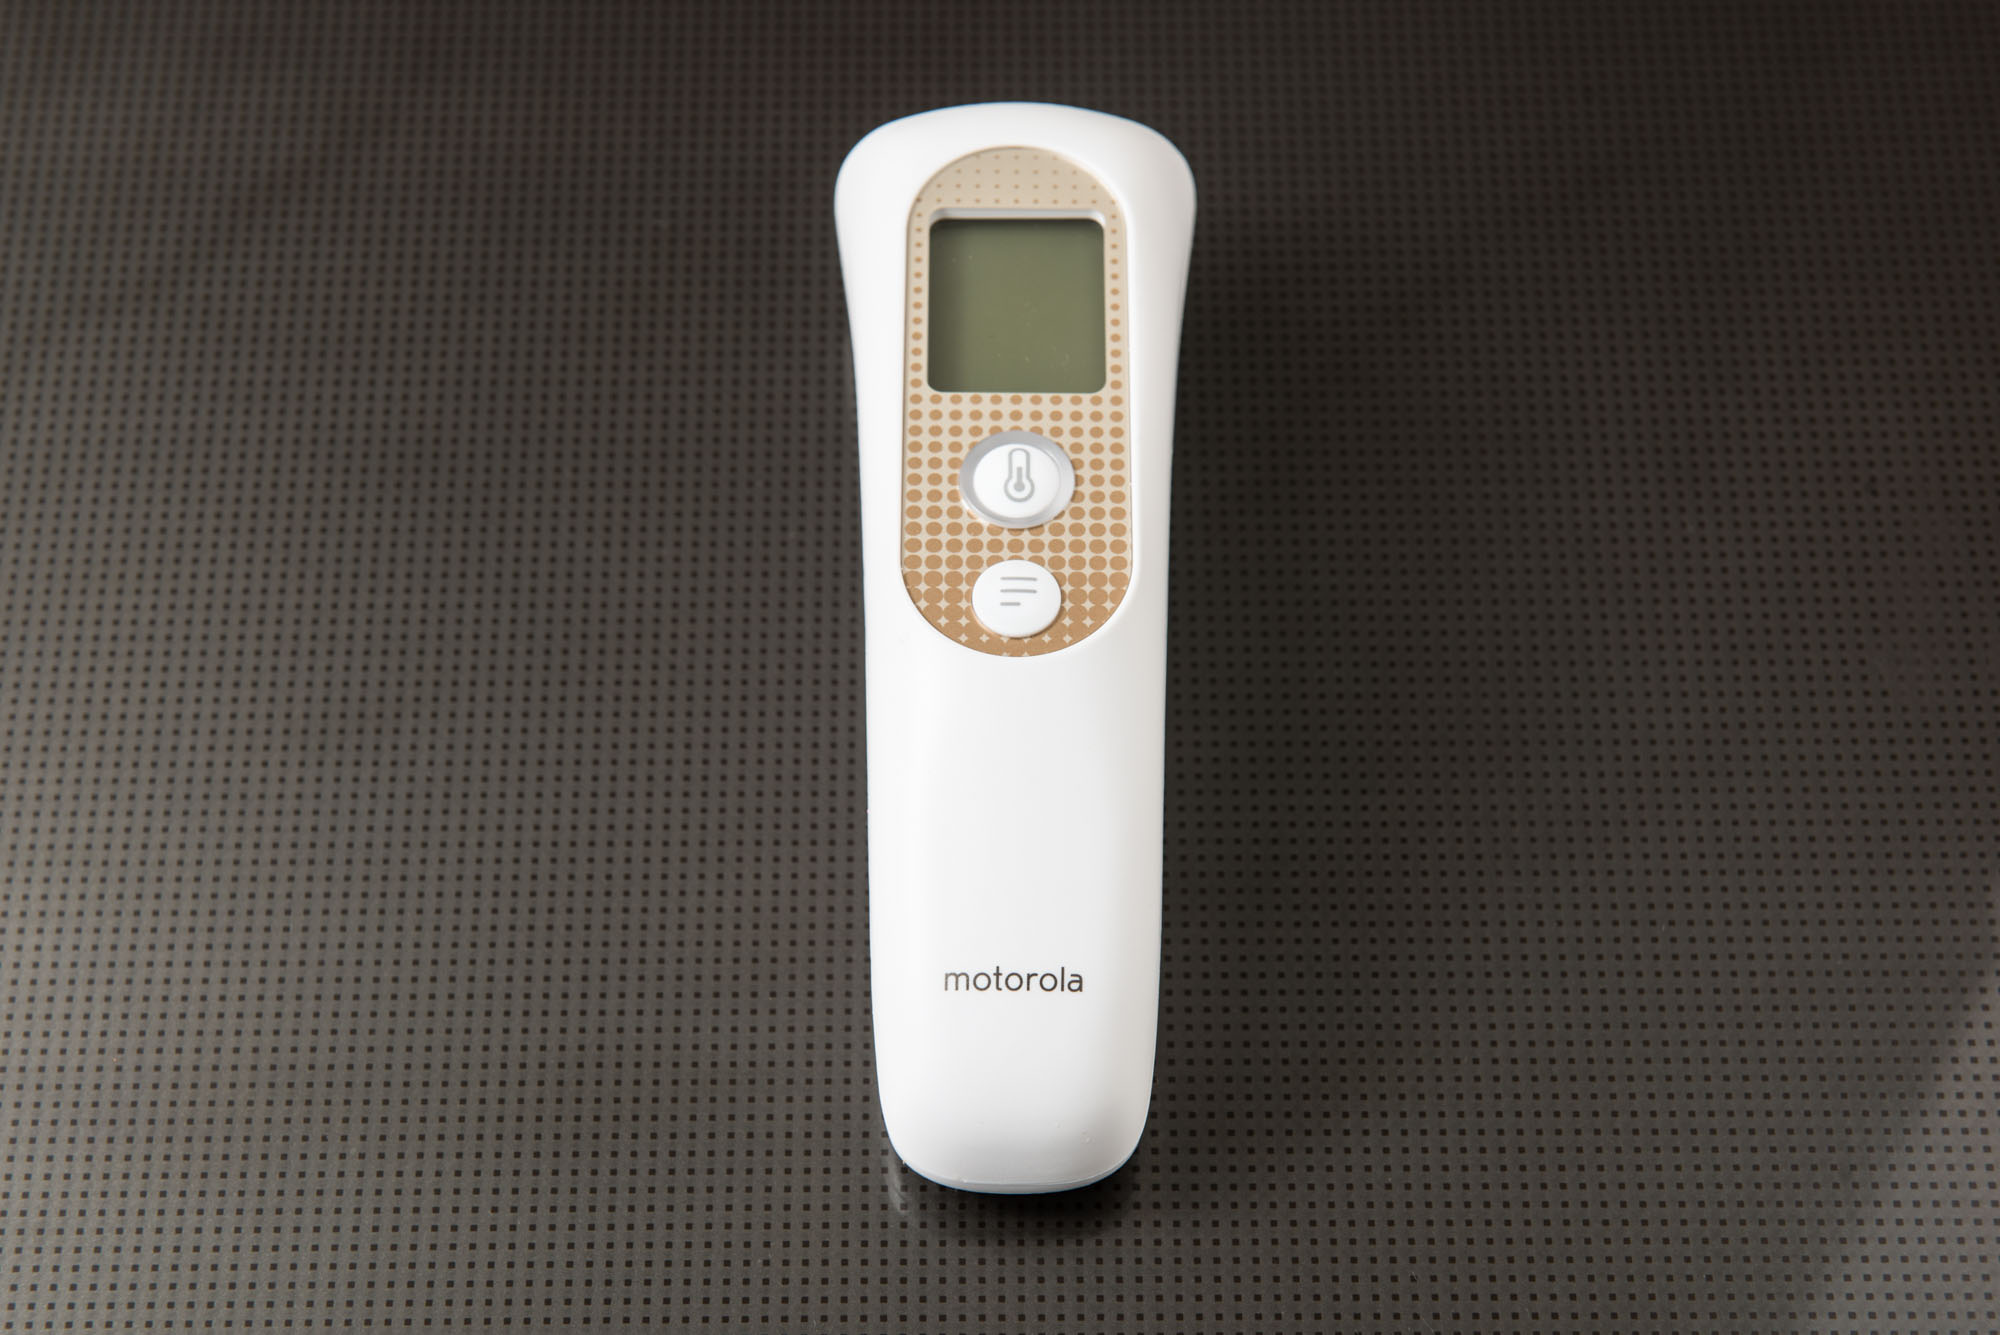 Best Baby Thermometers for Your Medicine Cabinet